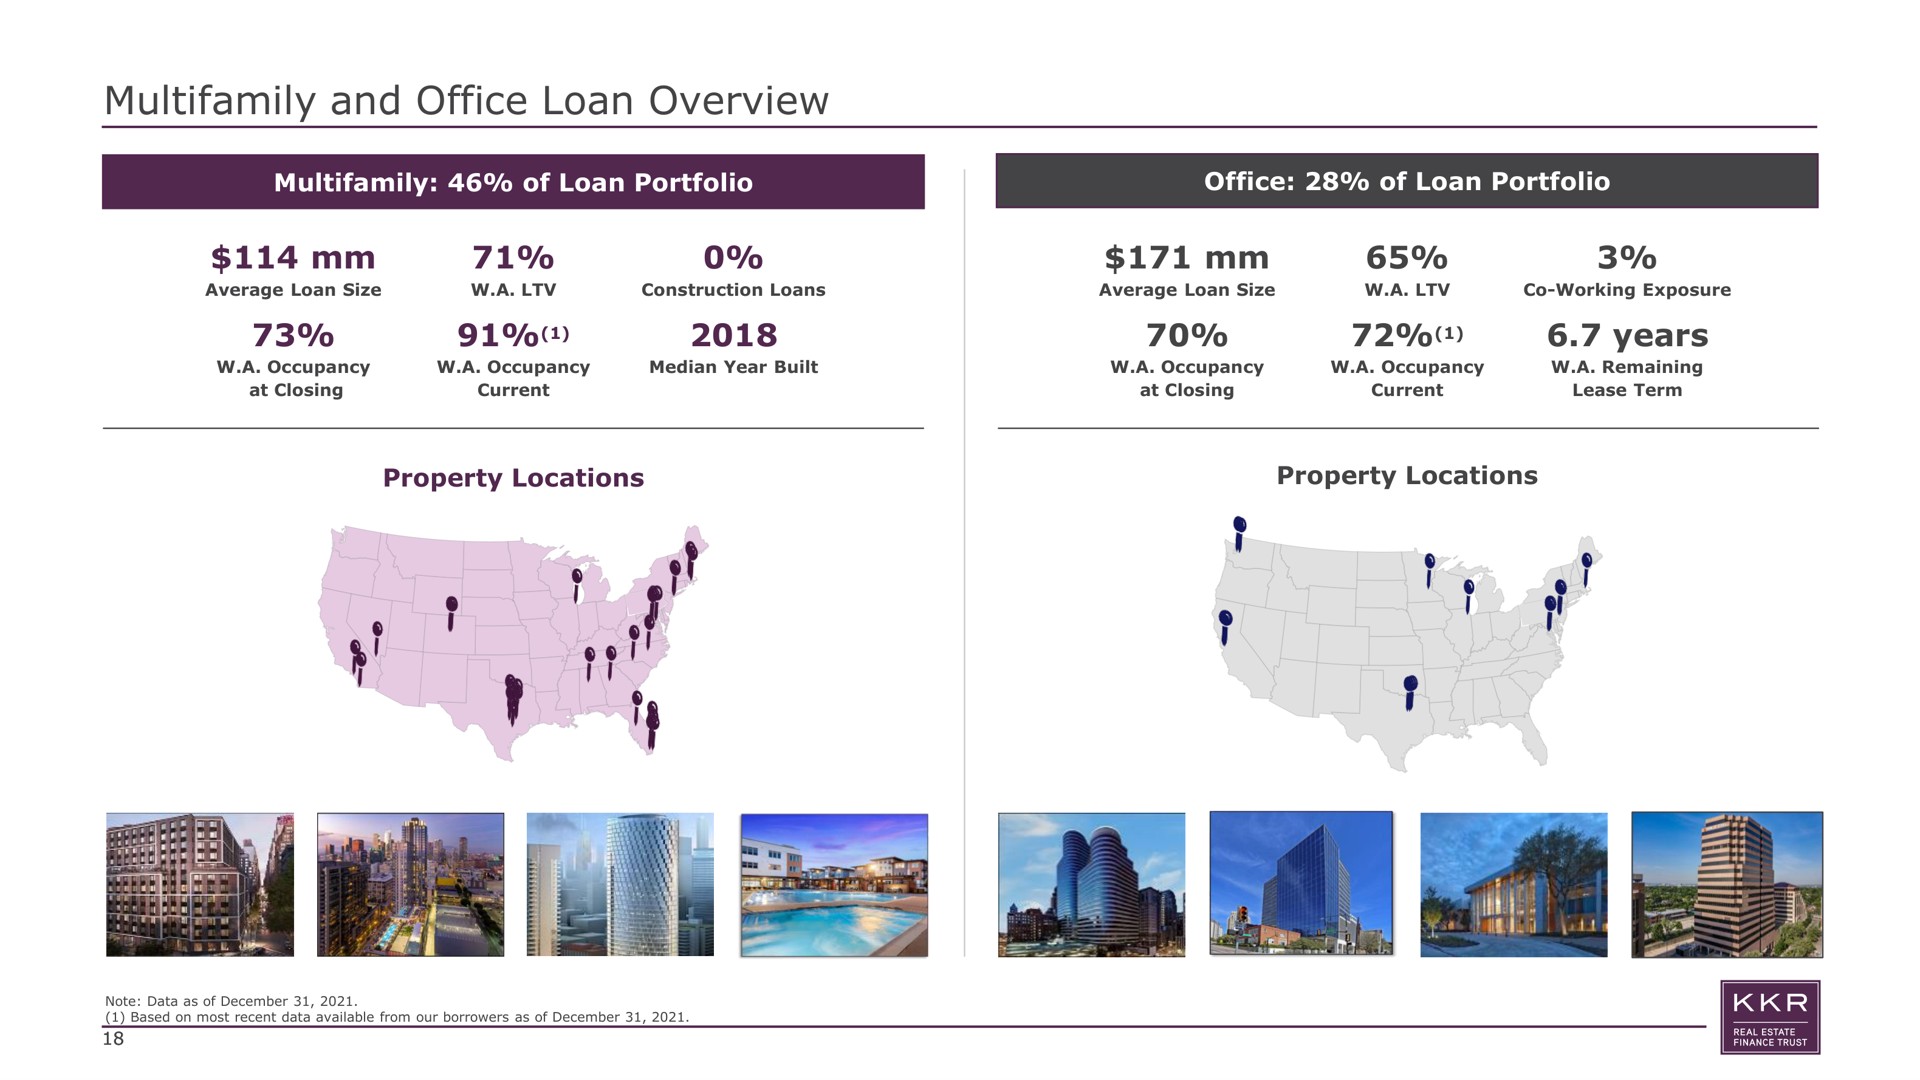 and office loan overview of loan portfolio office of loan portfolio years property locations property locations at if | KKR Real Estate Finance Trust